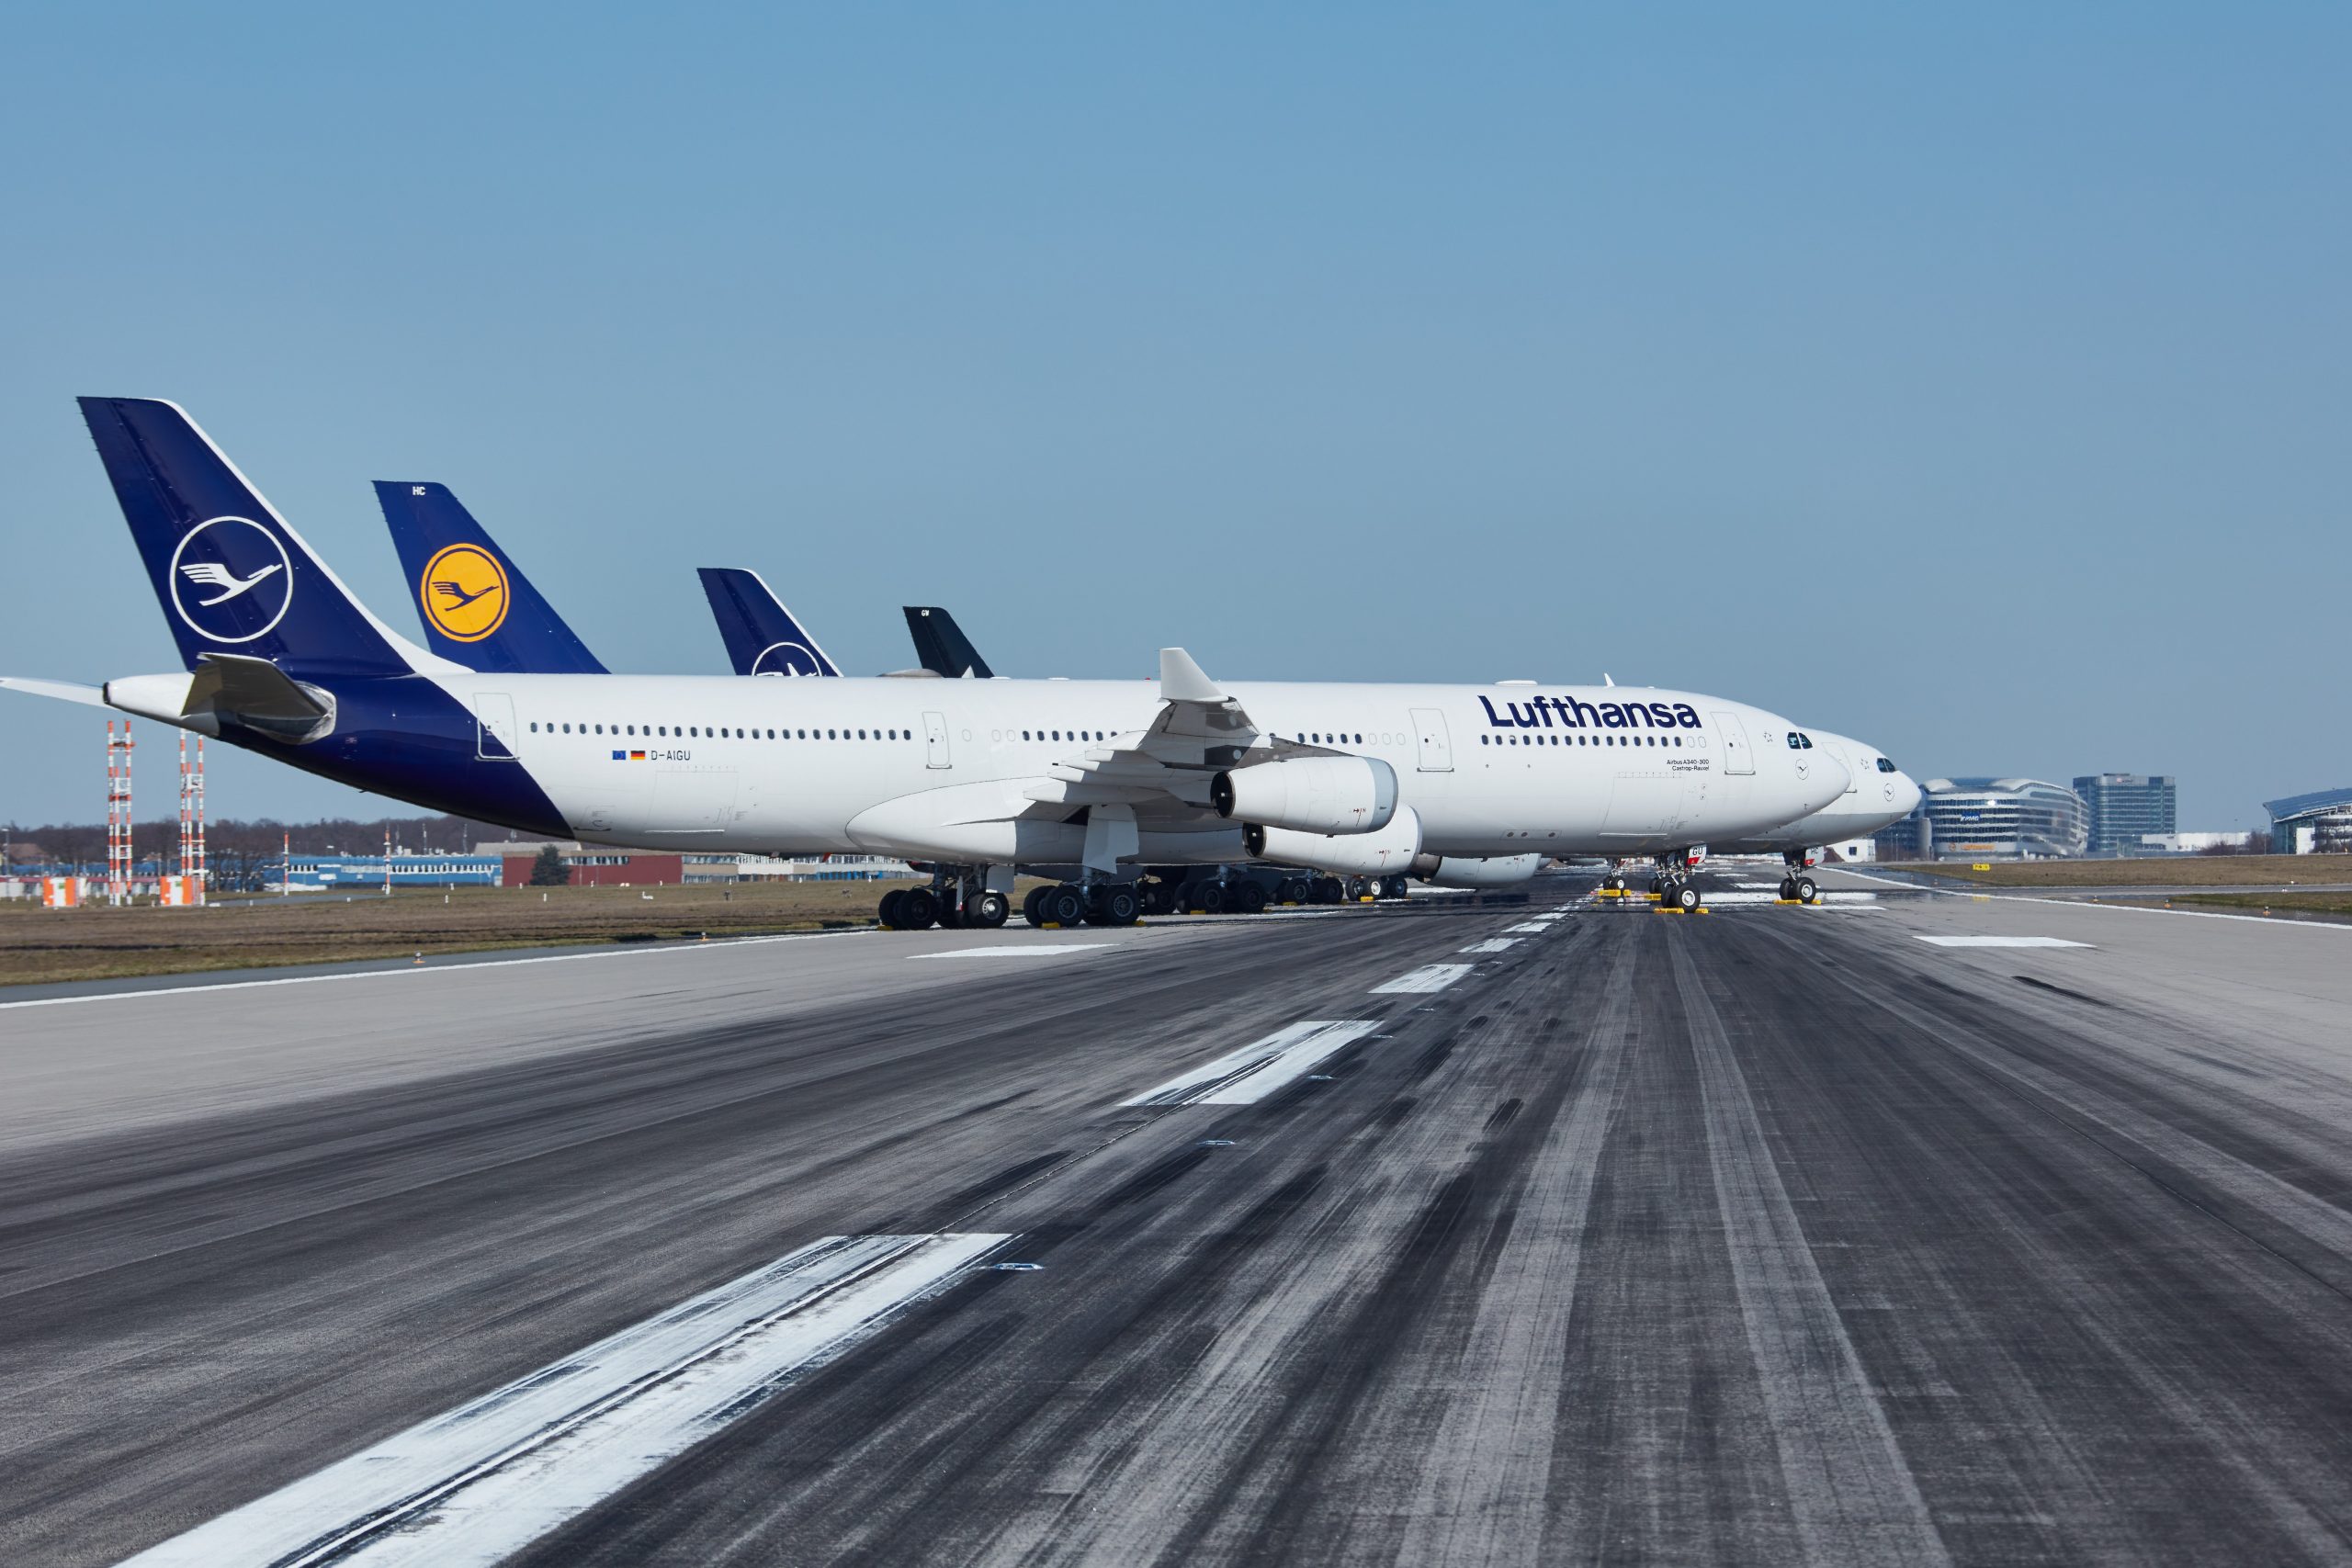 Lufthansa Flight From Boston To Munich Forced to Divert Twice After  Suffering Engine Problems